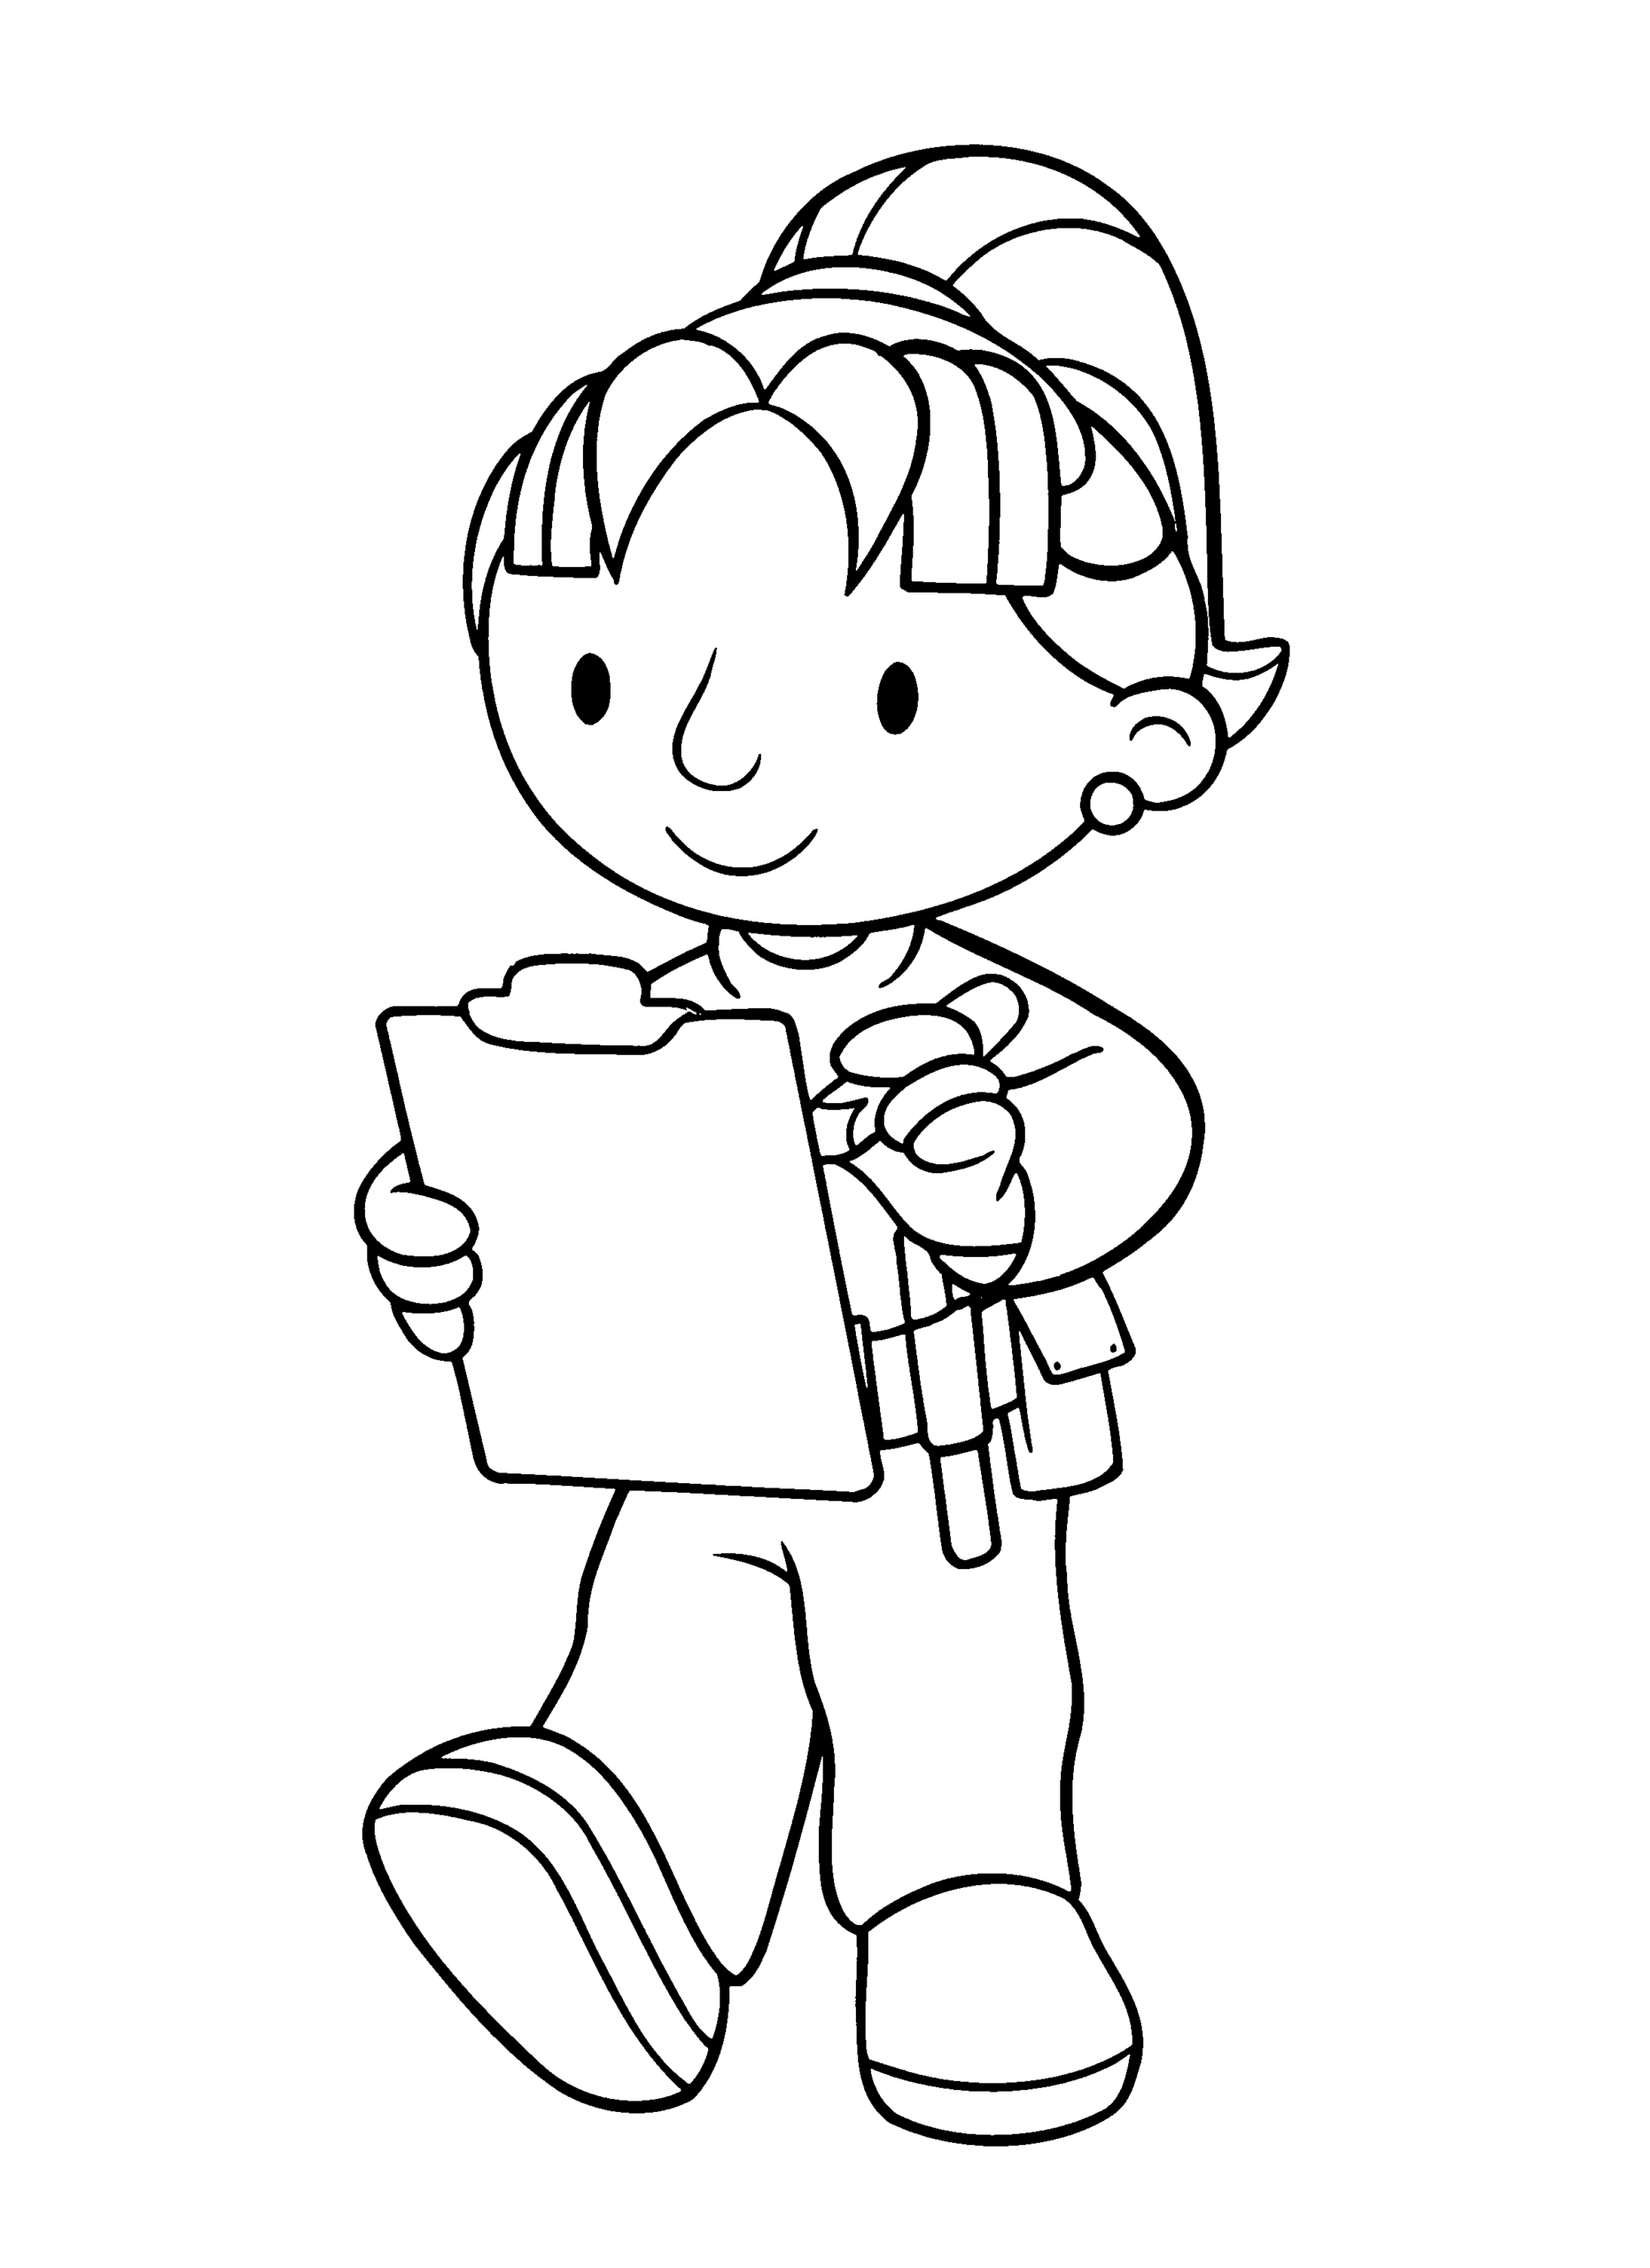 Bob the Builder Coloring Pages TV Film bob the builder 34 Printable 2020 01053 Coloring4free